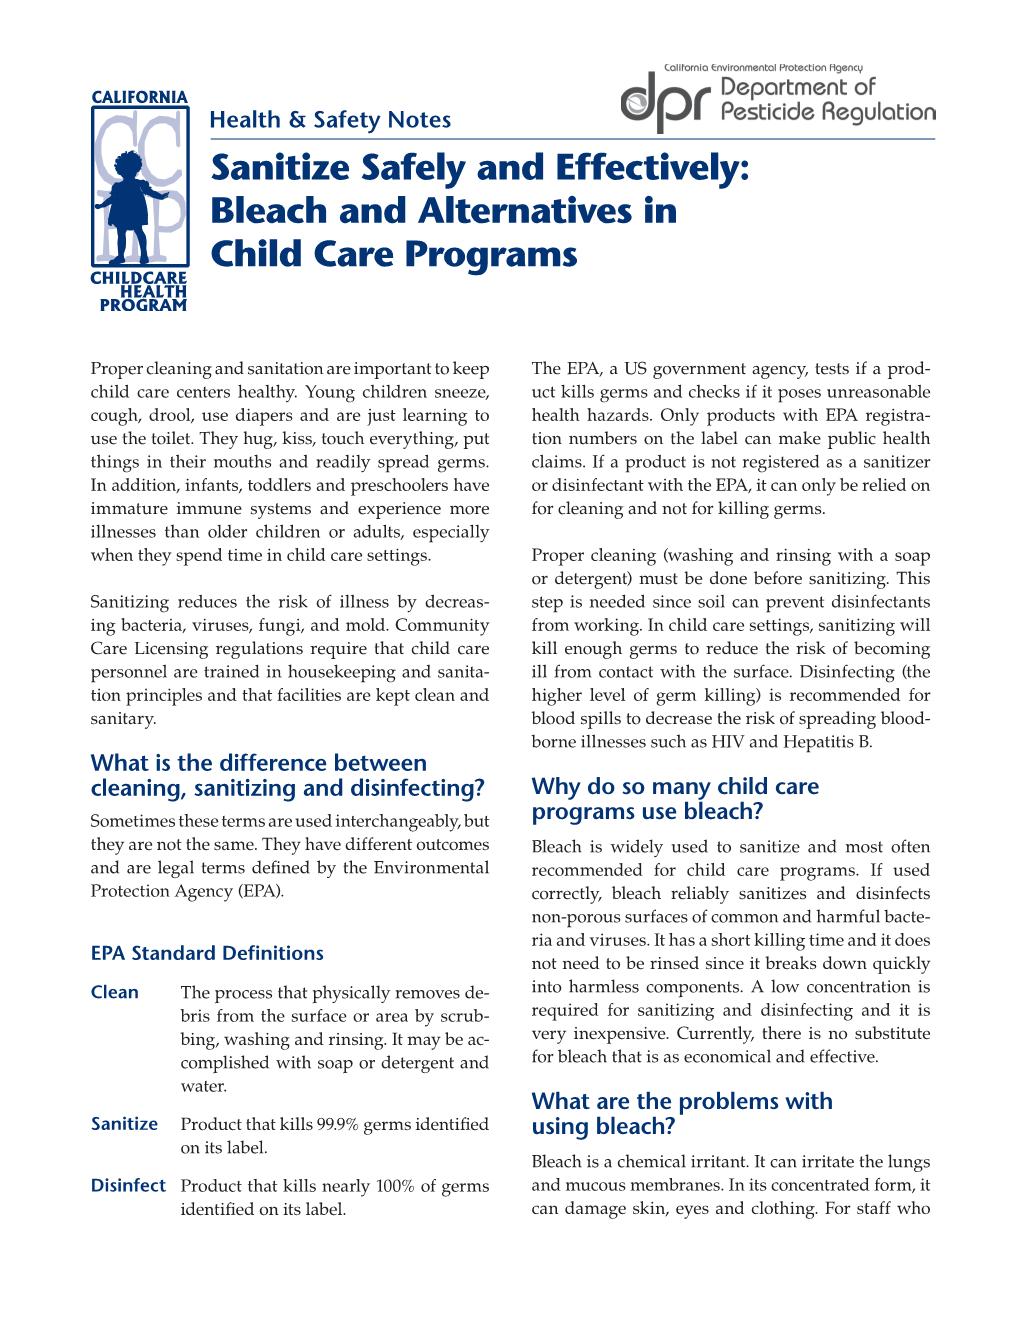 Sanitize Safely and Effectively: Bleach and Alternatives in Child Care Programs